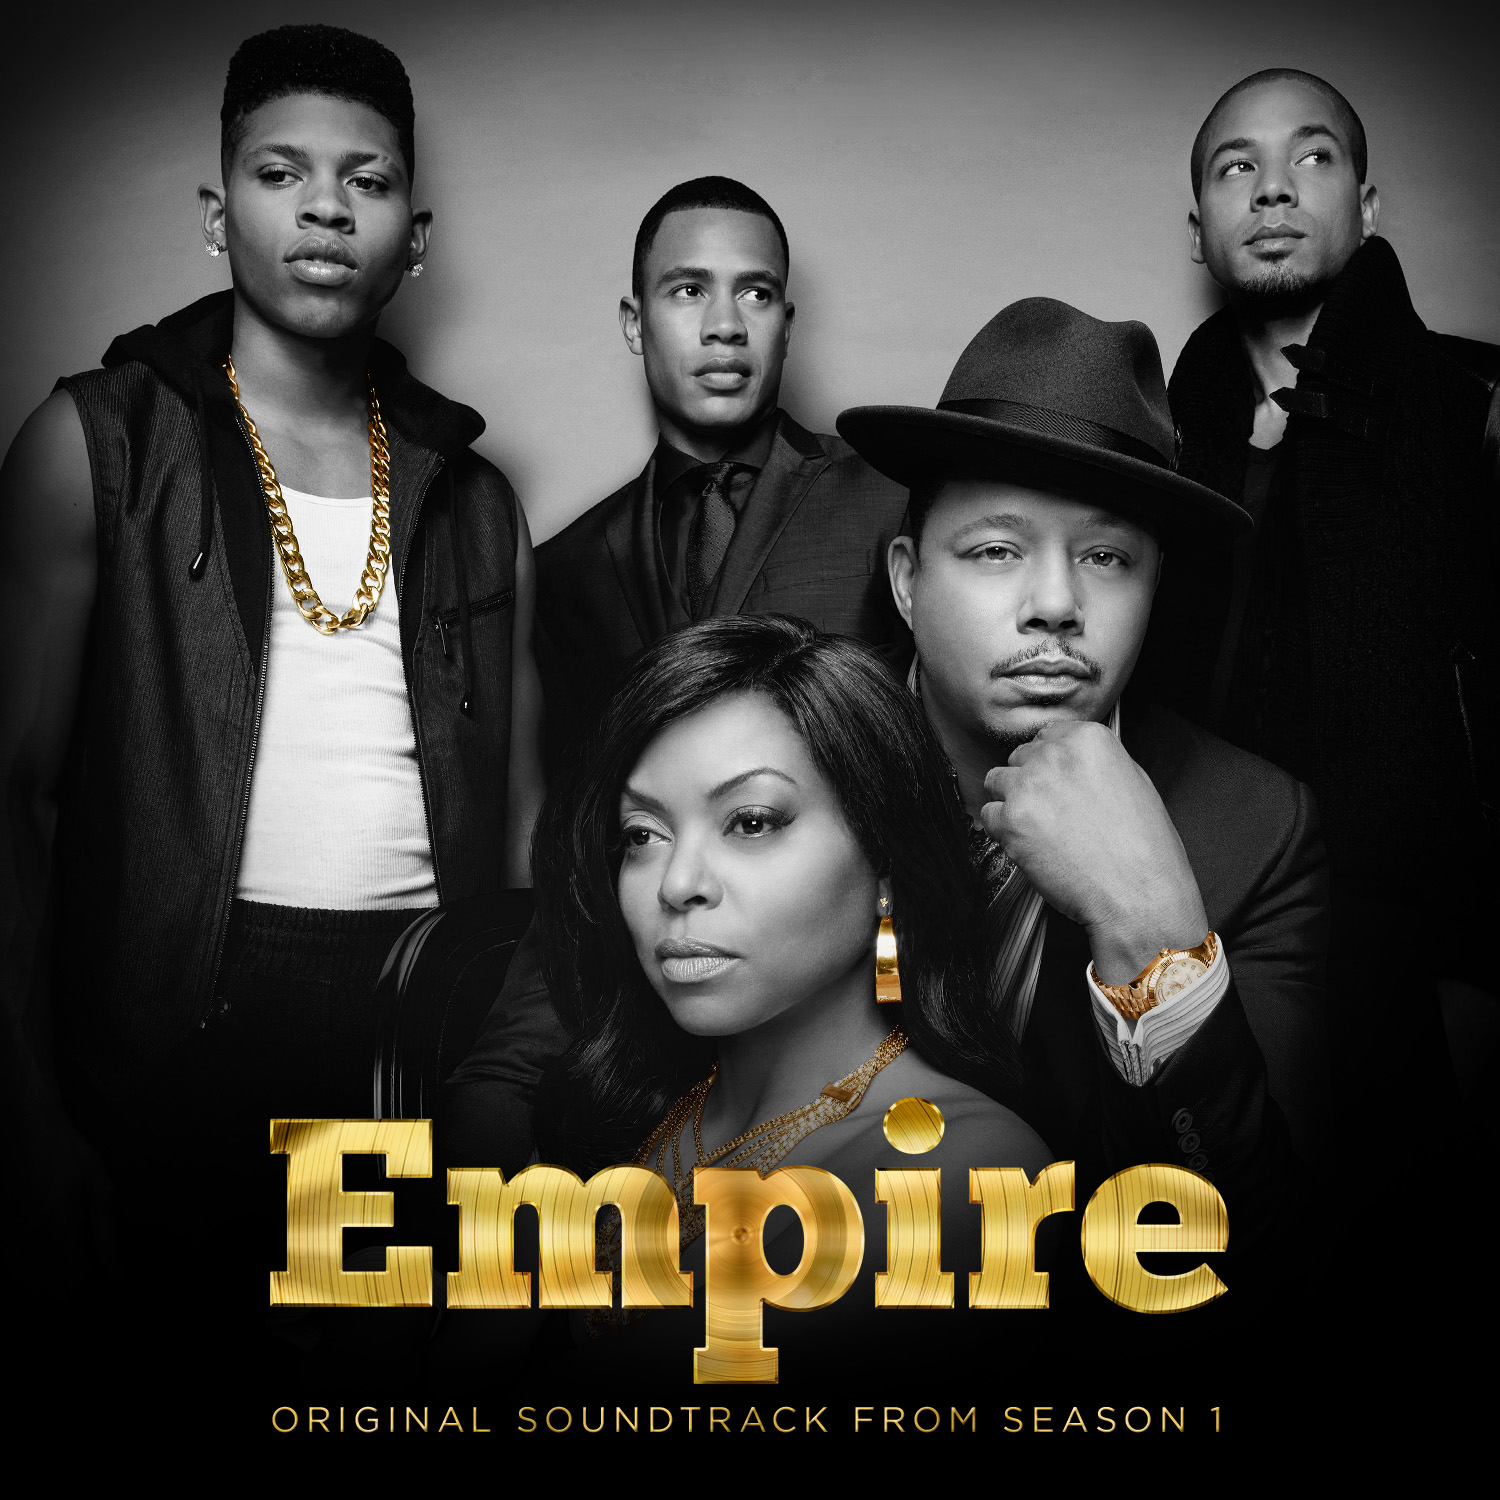 Cover image of the original soundtrack from Season 1 of "Empire."